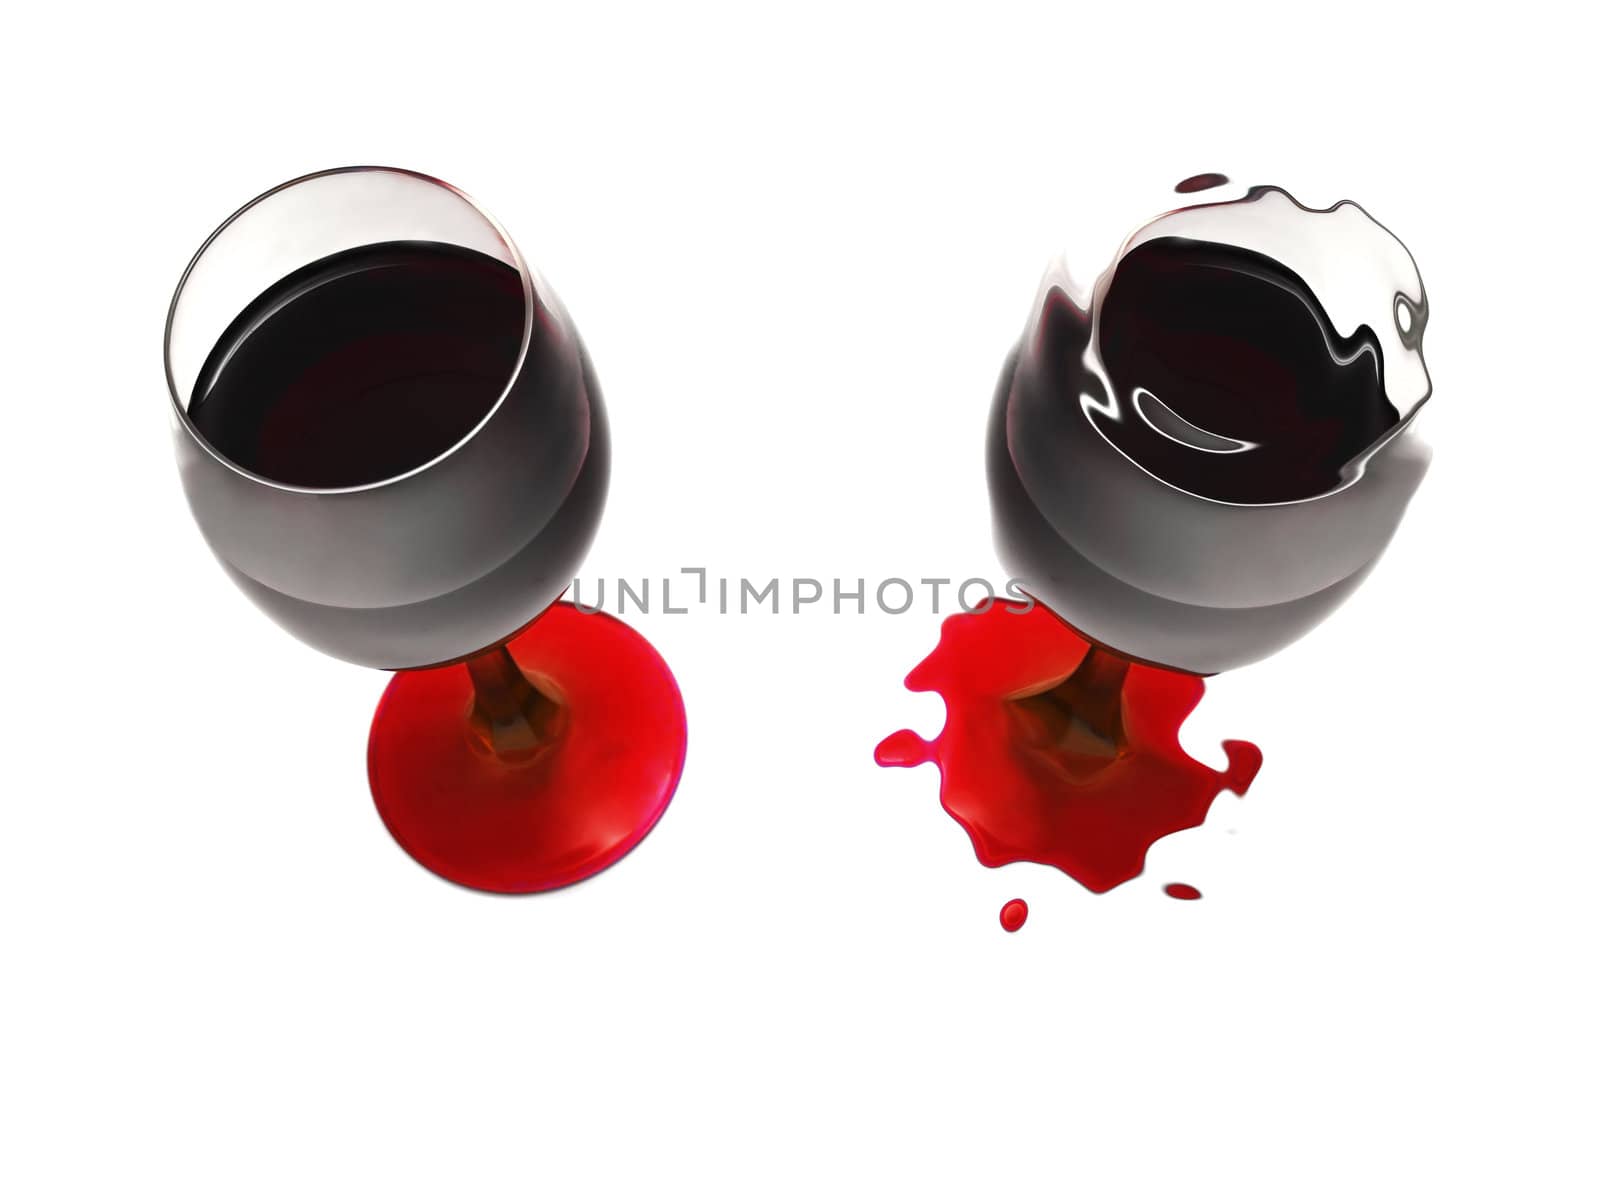 Deformed cup�s of wine isolated in a white background